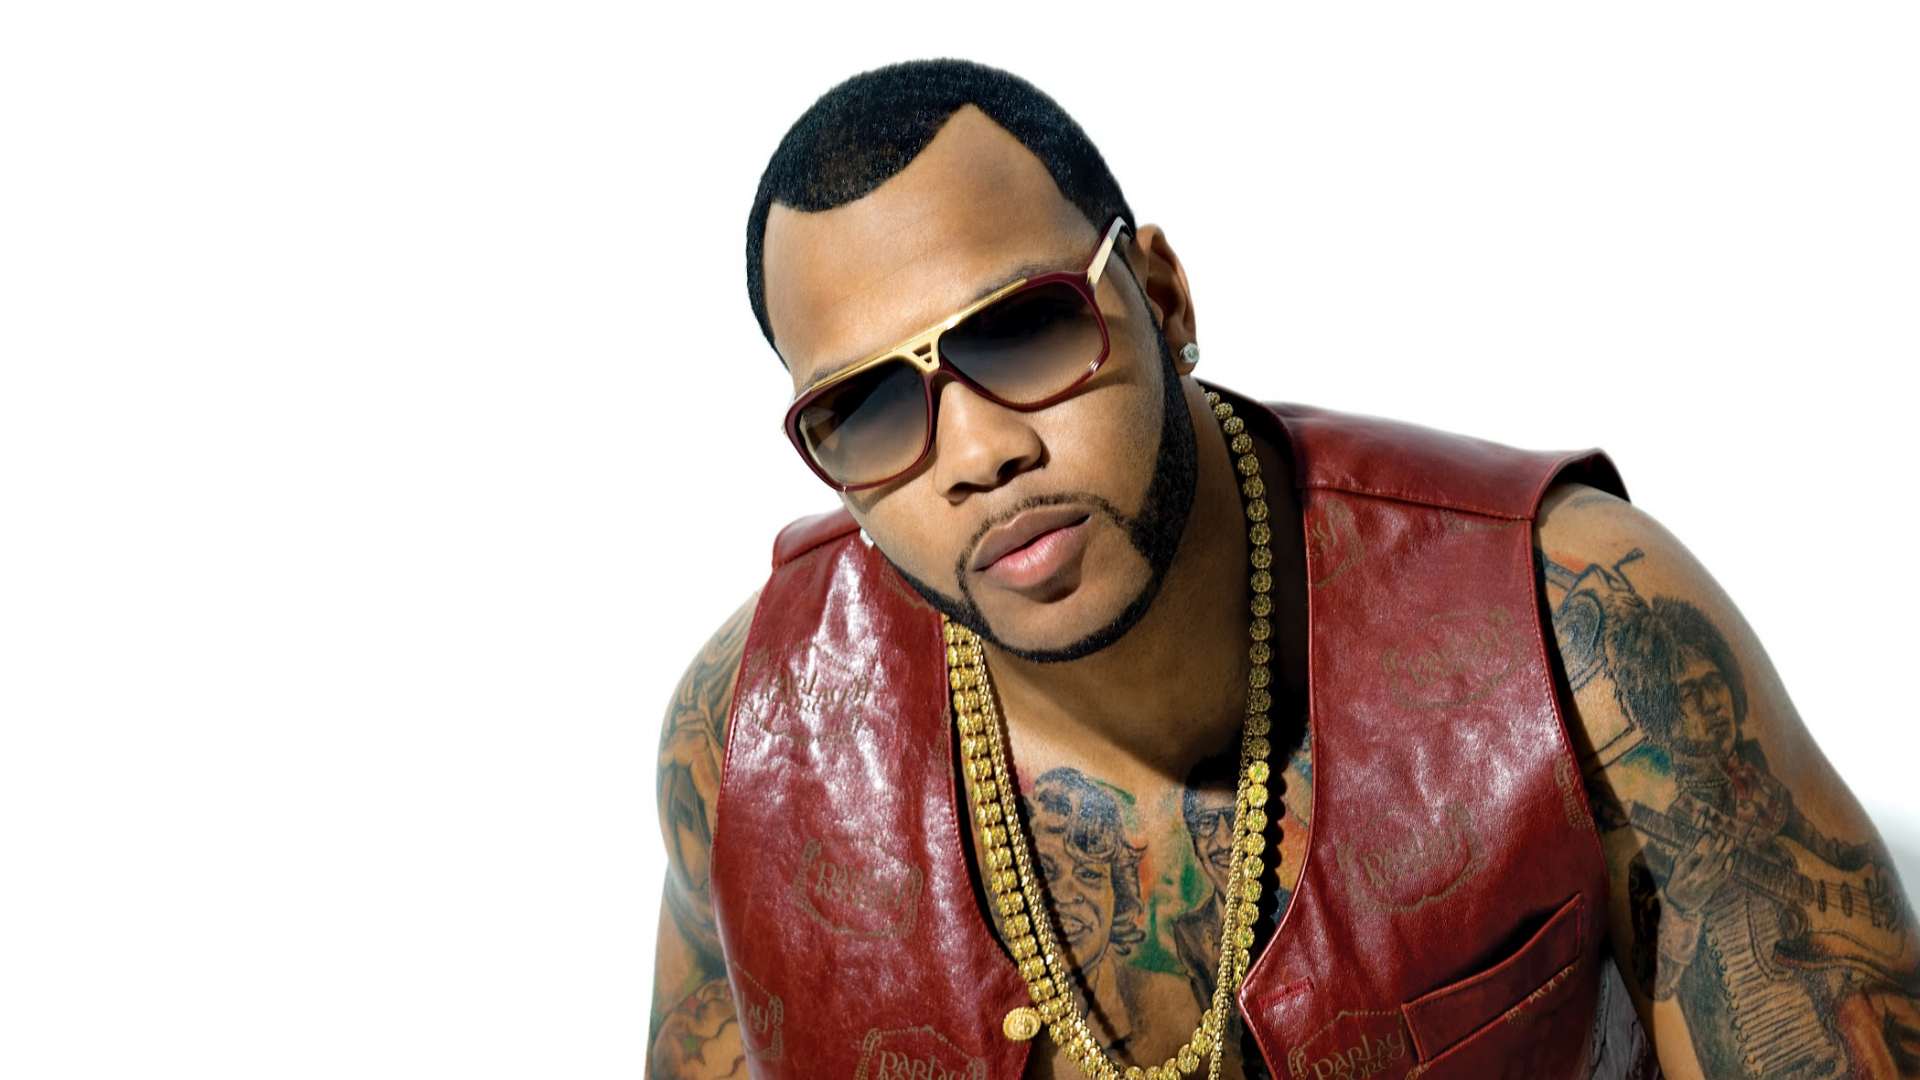 5 Flo Rida HD Wallpapers | Backgrounds - Wallpaper Abyss